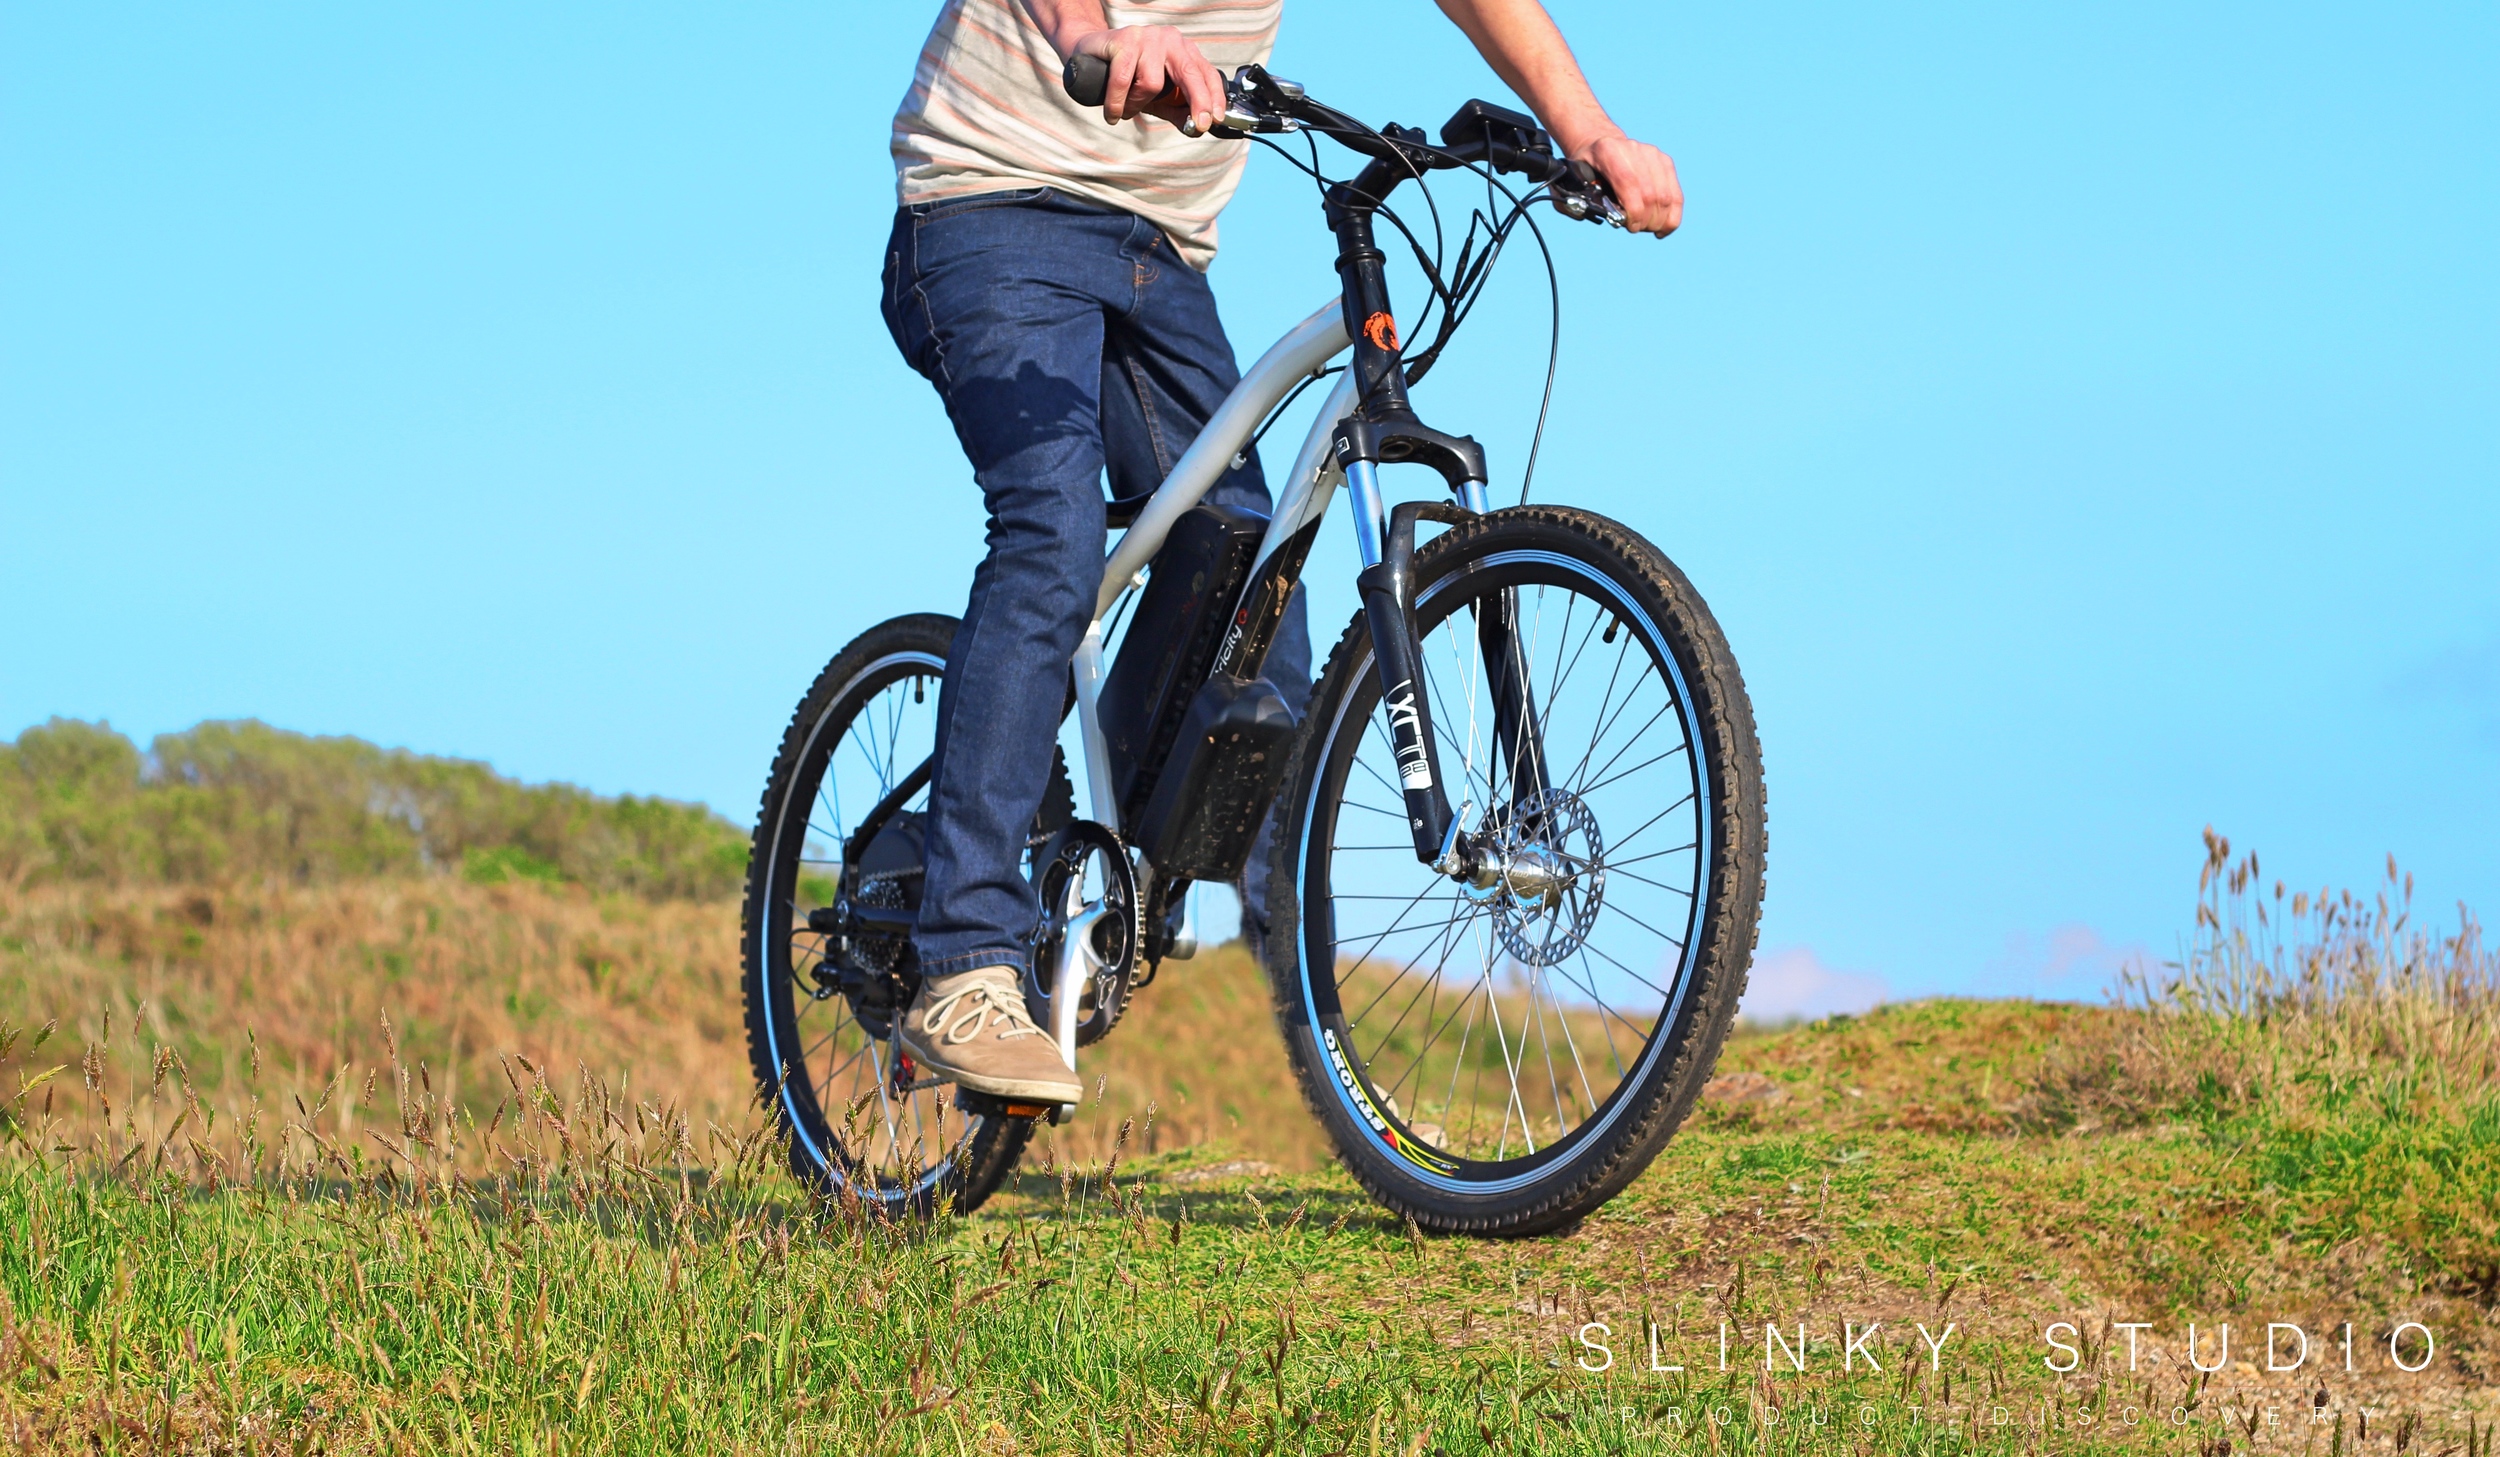 Cyclotricity Stealth eBike Riding in Cornwall Countryside.jpg